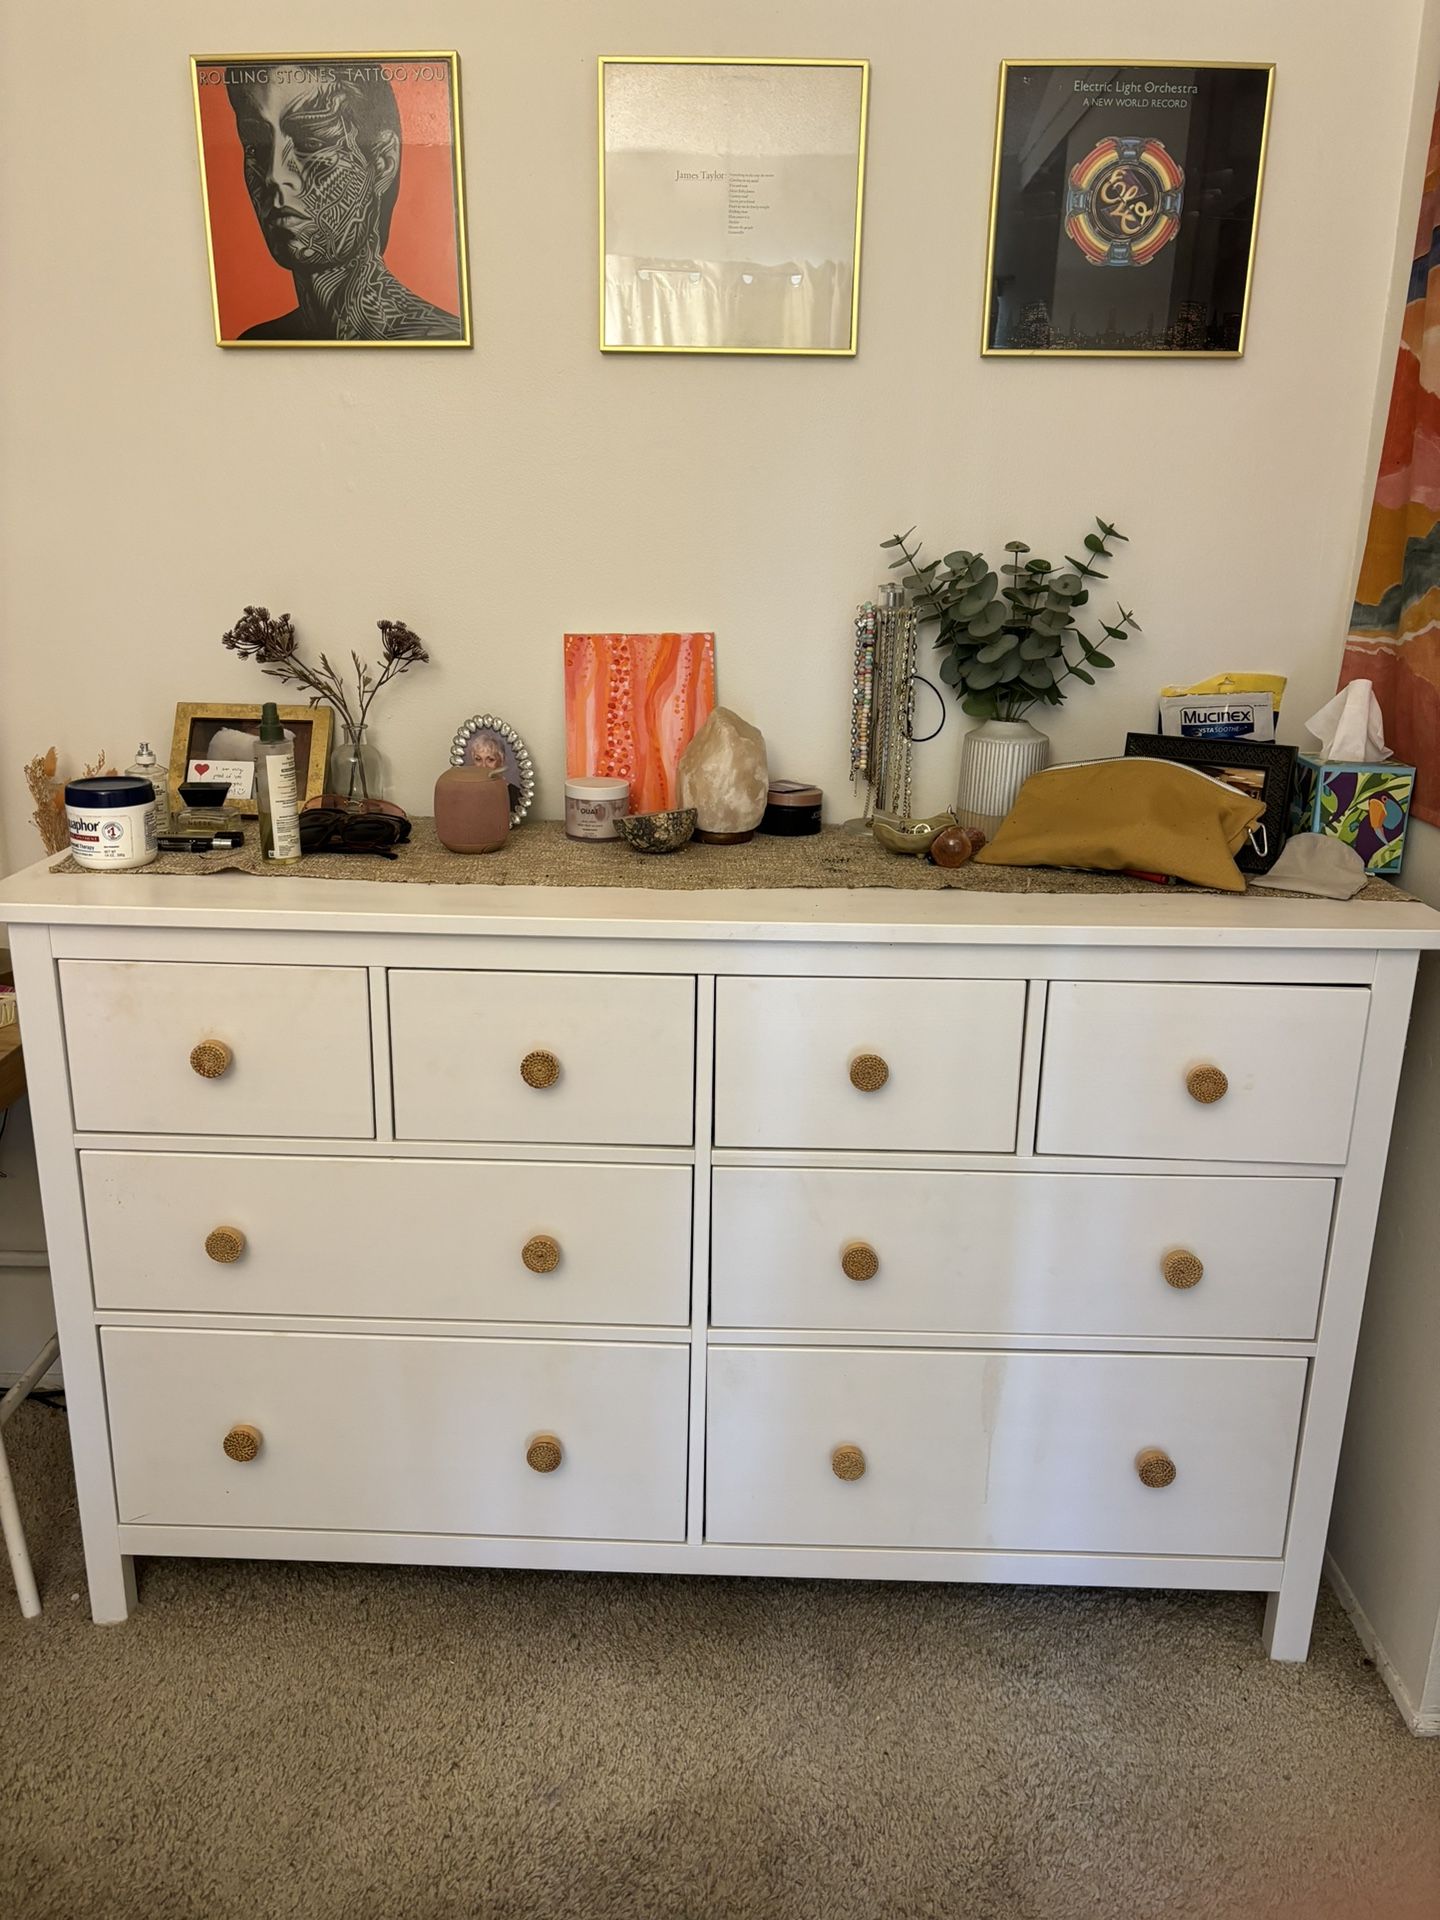 White Dresser With Rattan Knobs (on Hold)